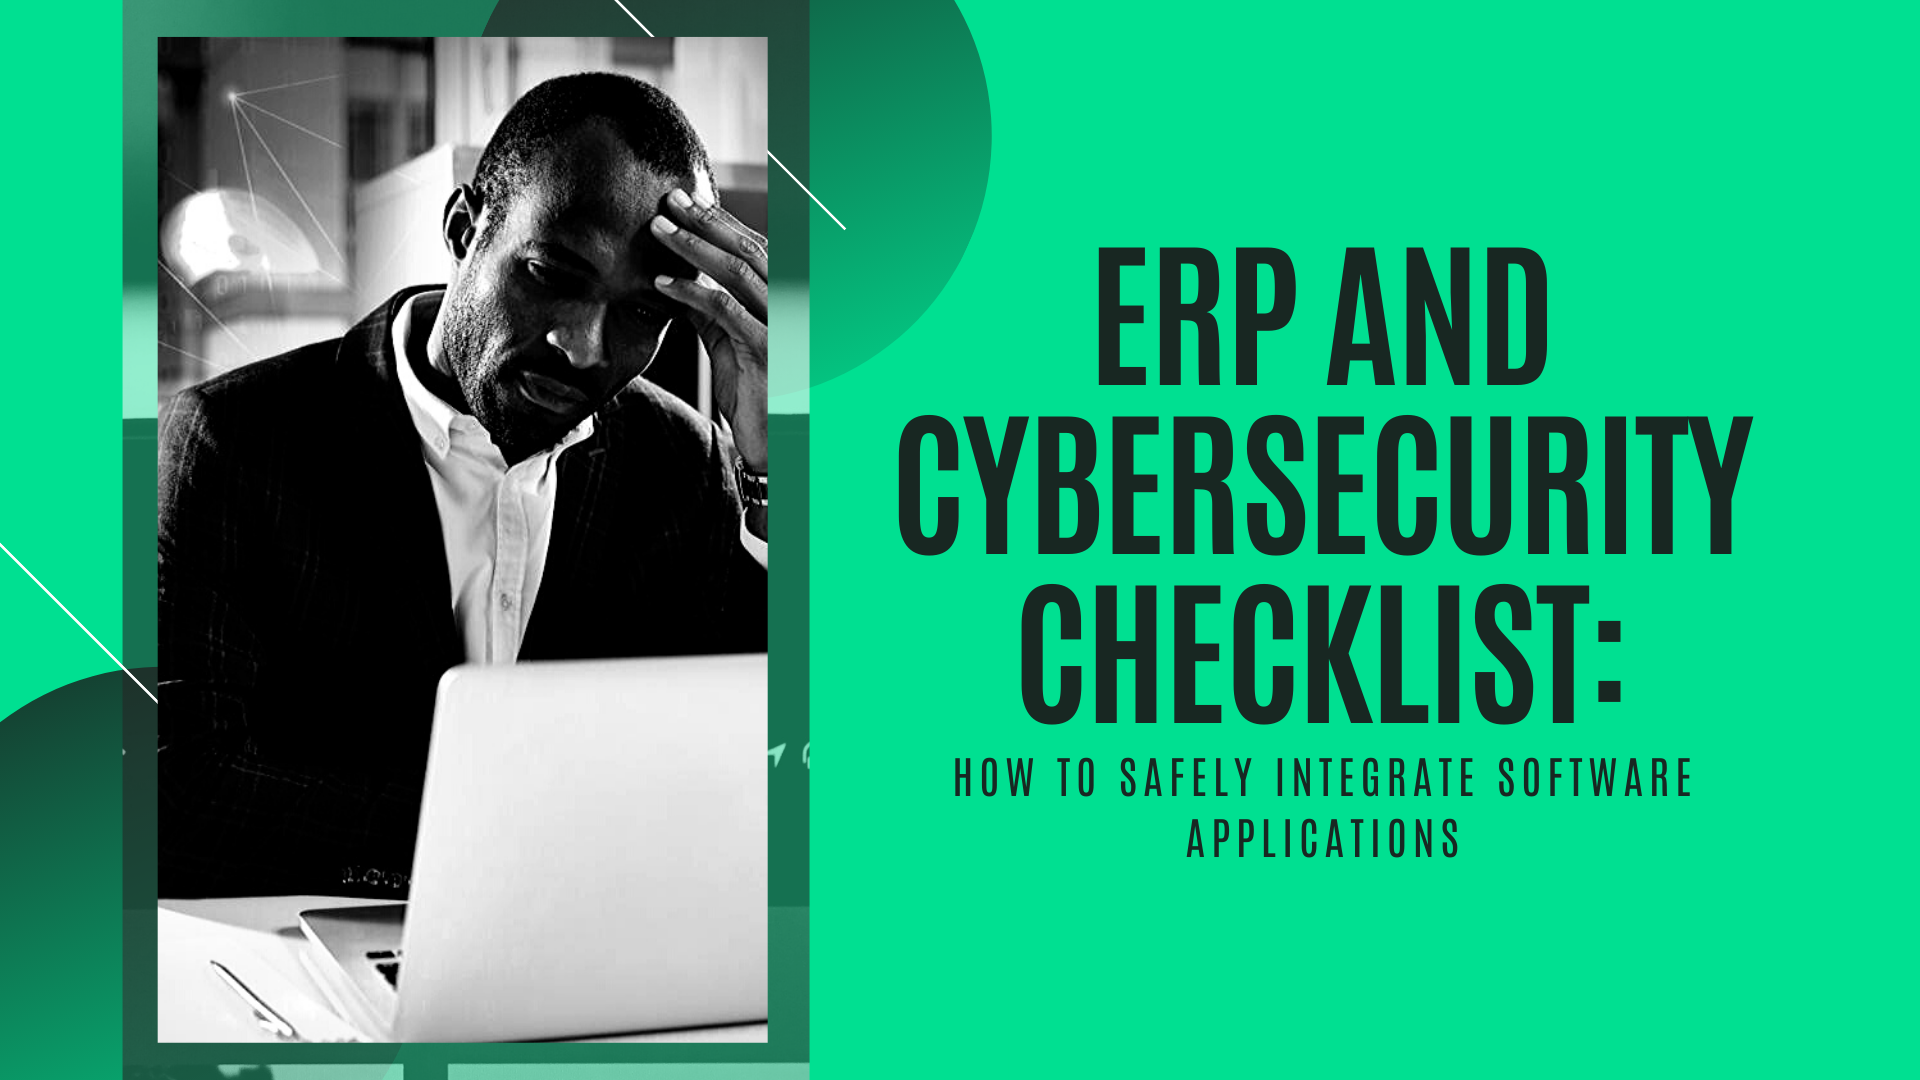 ERP and Cybersecurity Checklist: How to Safely Integrate Software Applications